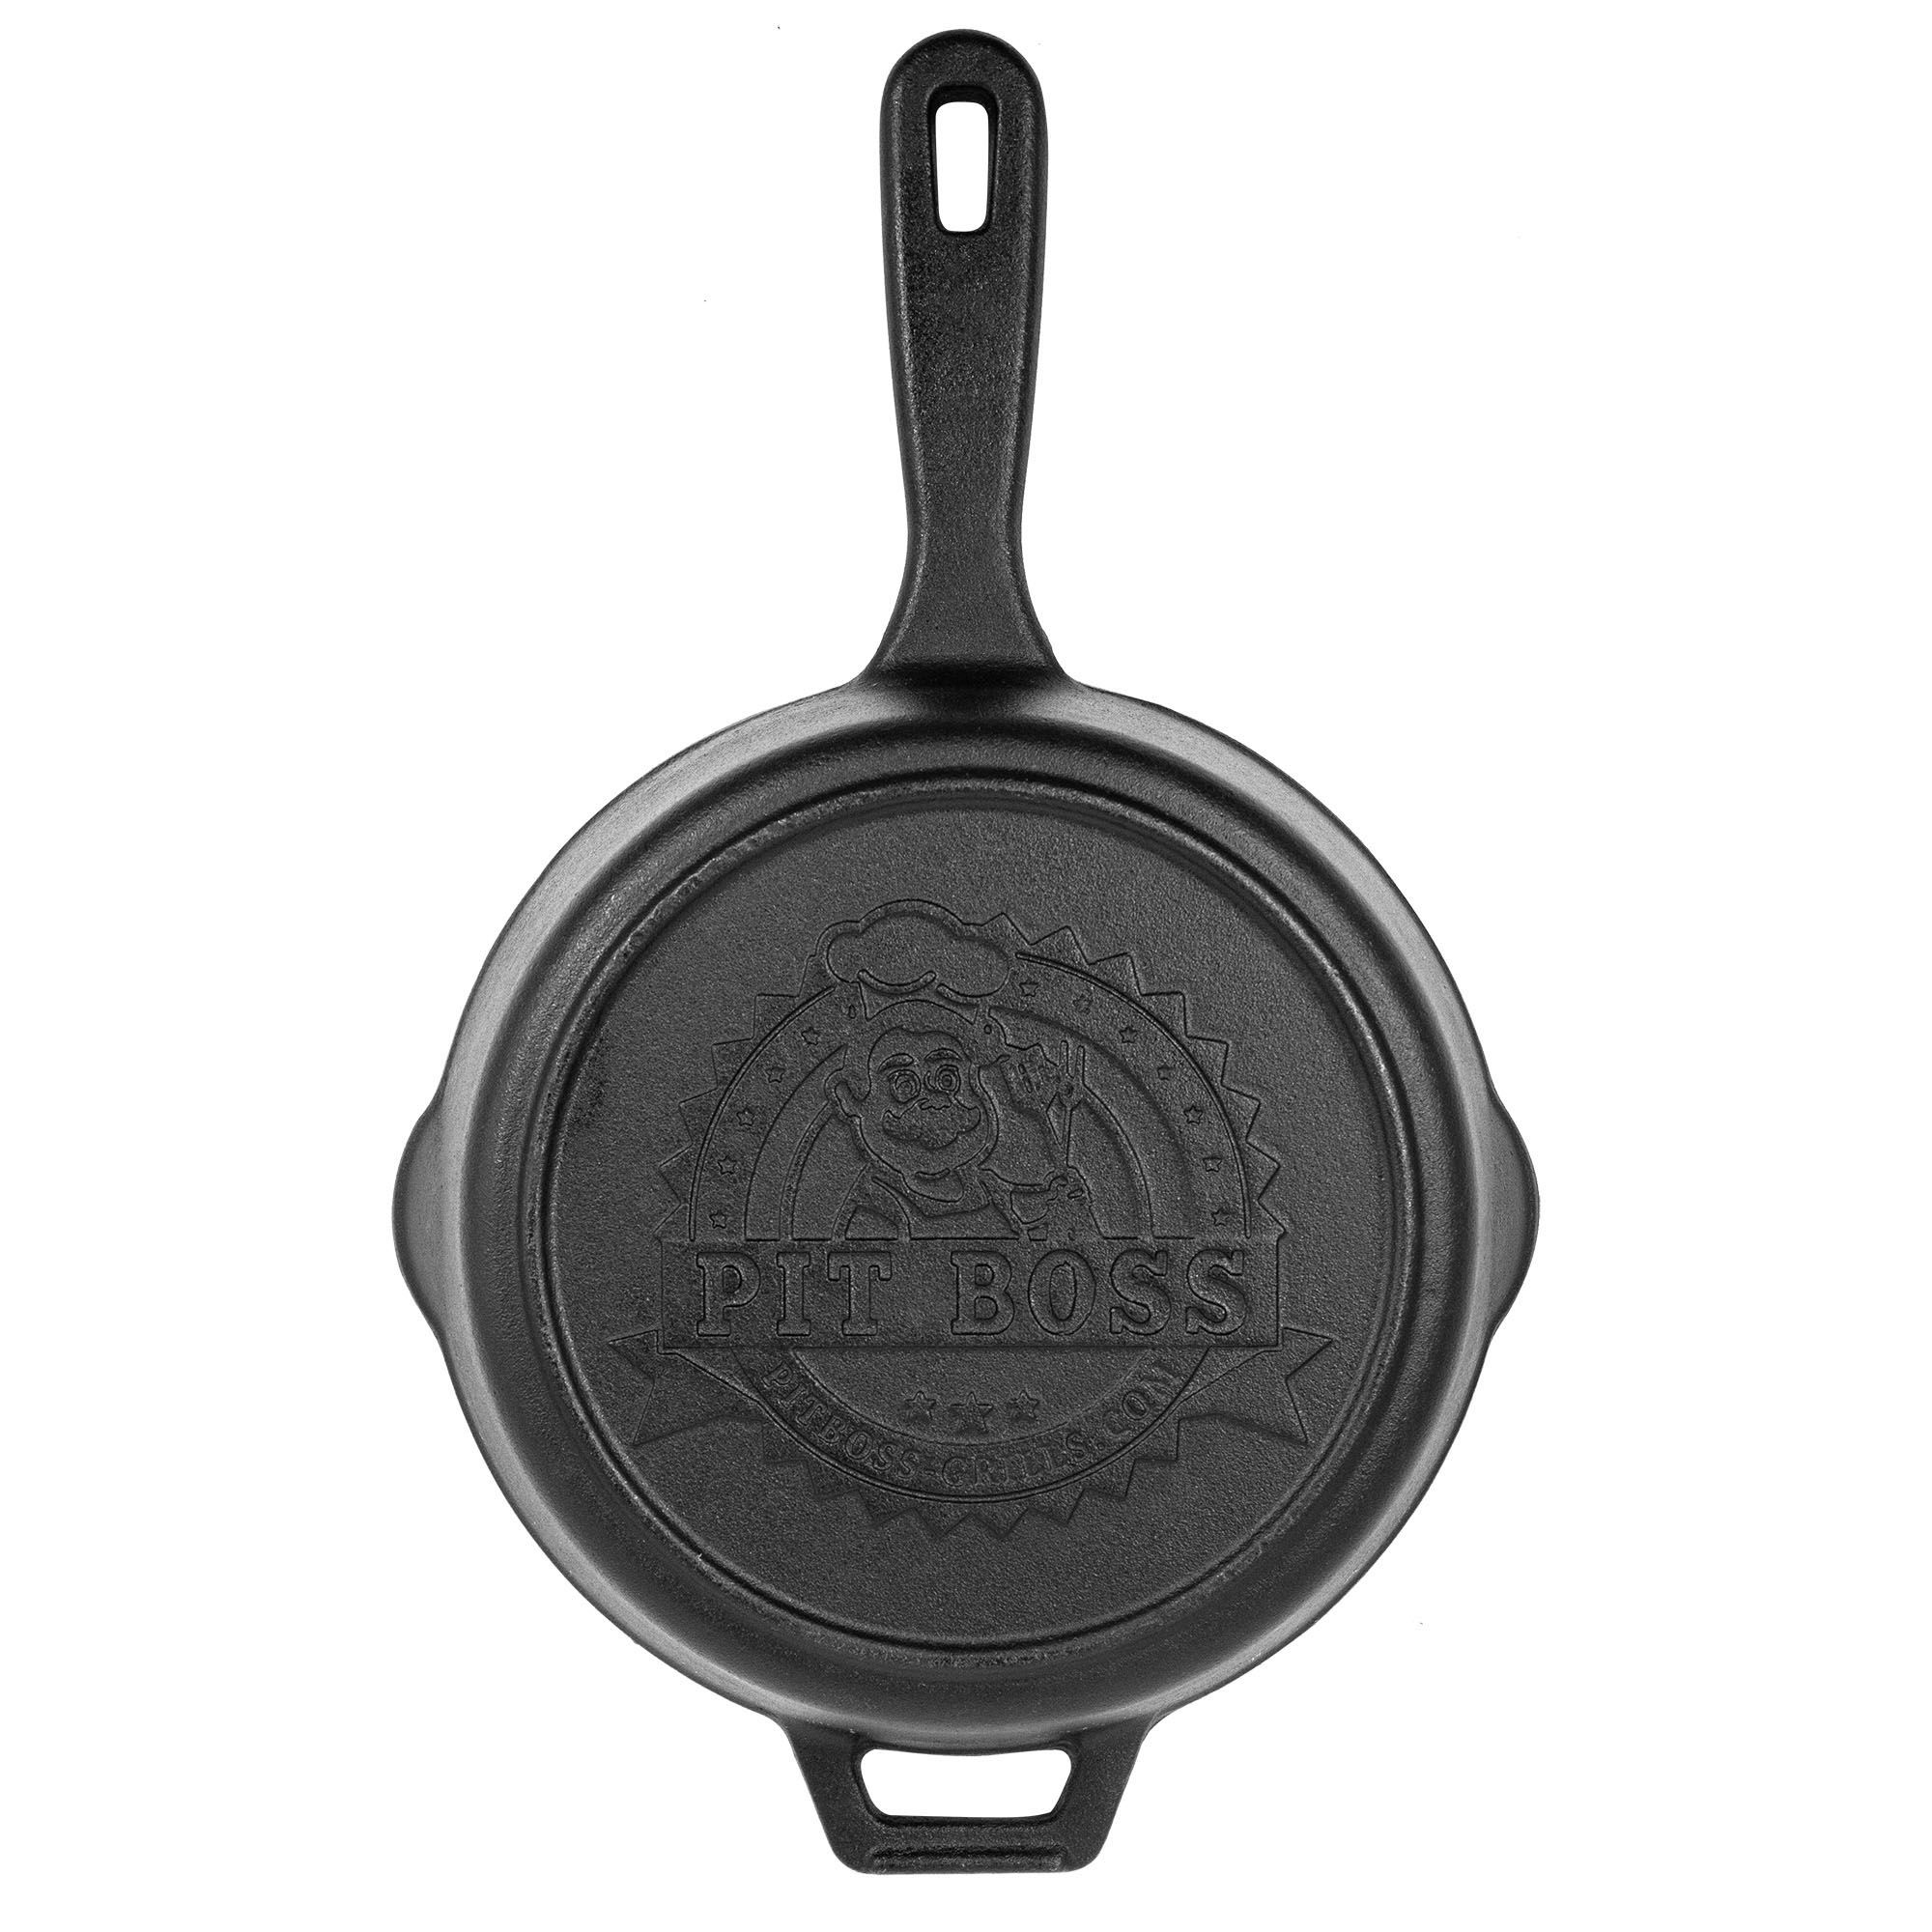 Lodge Cast Iron Pre-Seasoned Deep Skillet with Iron Cover and